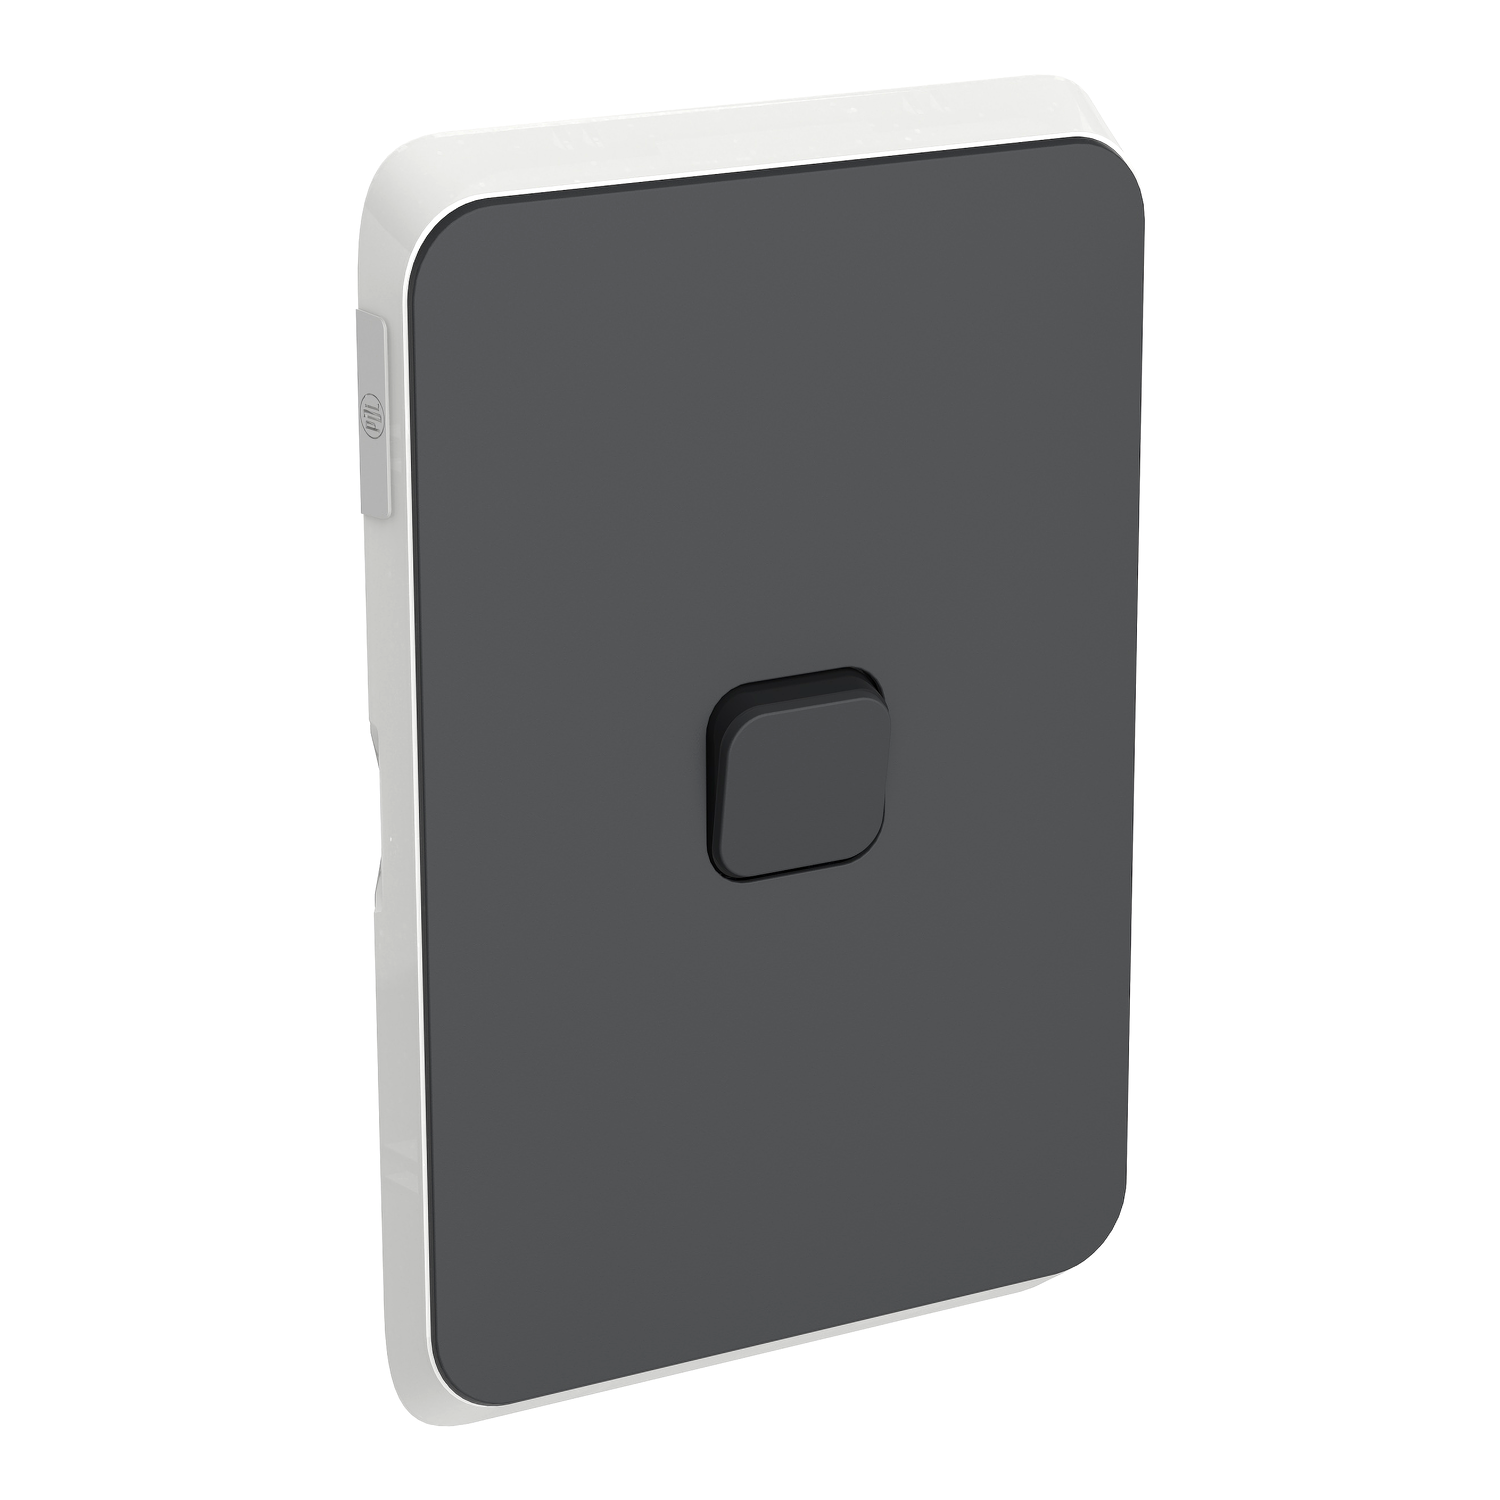 PDL Iconic - Cover Plate Switch 1-Gang - Anthracite